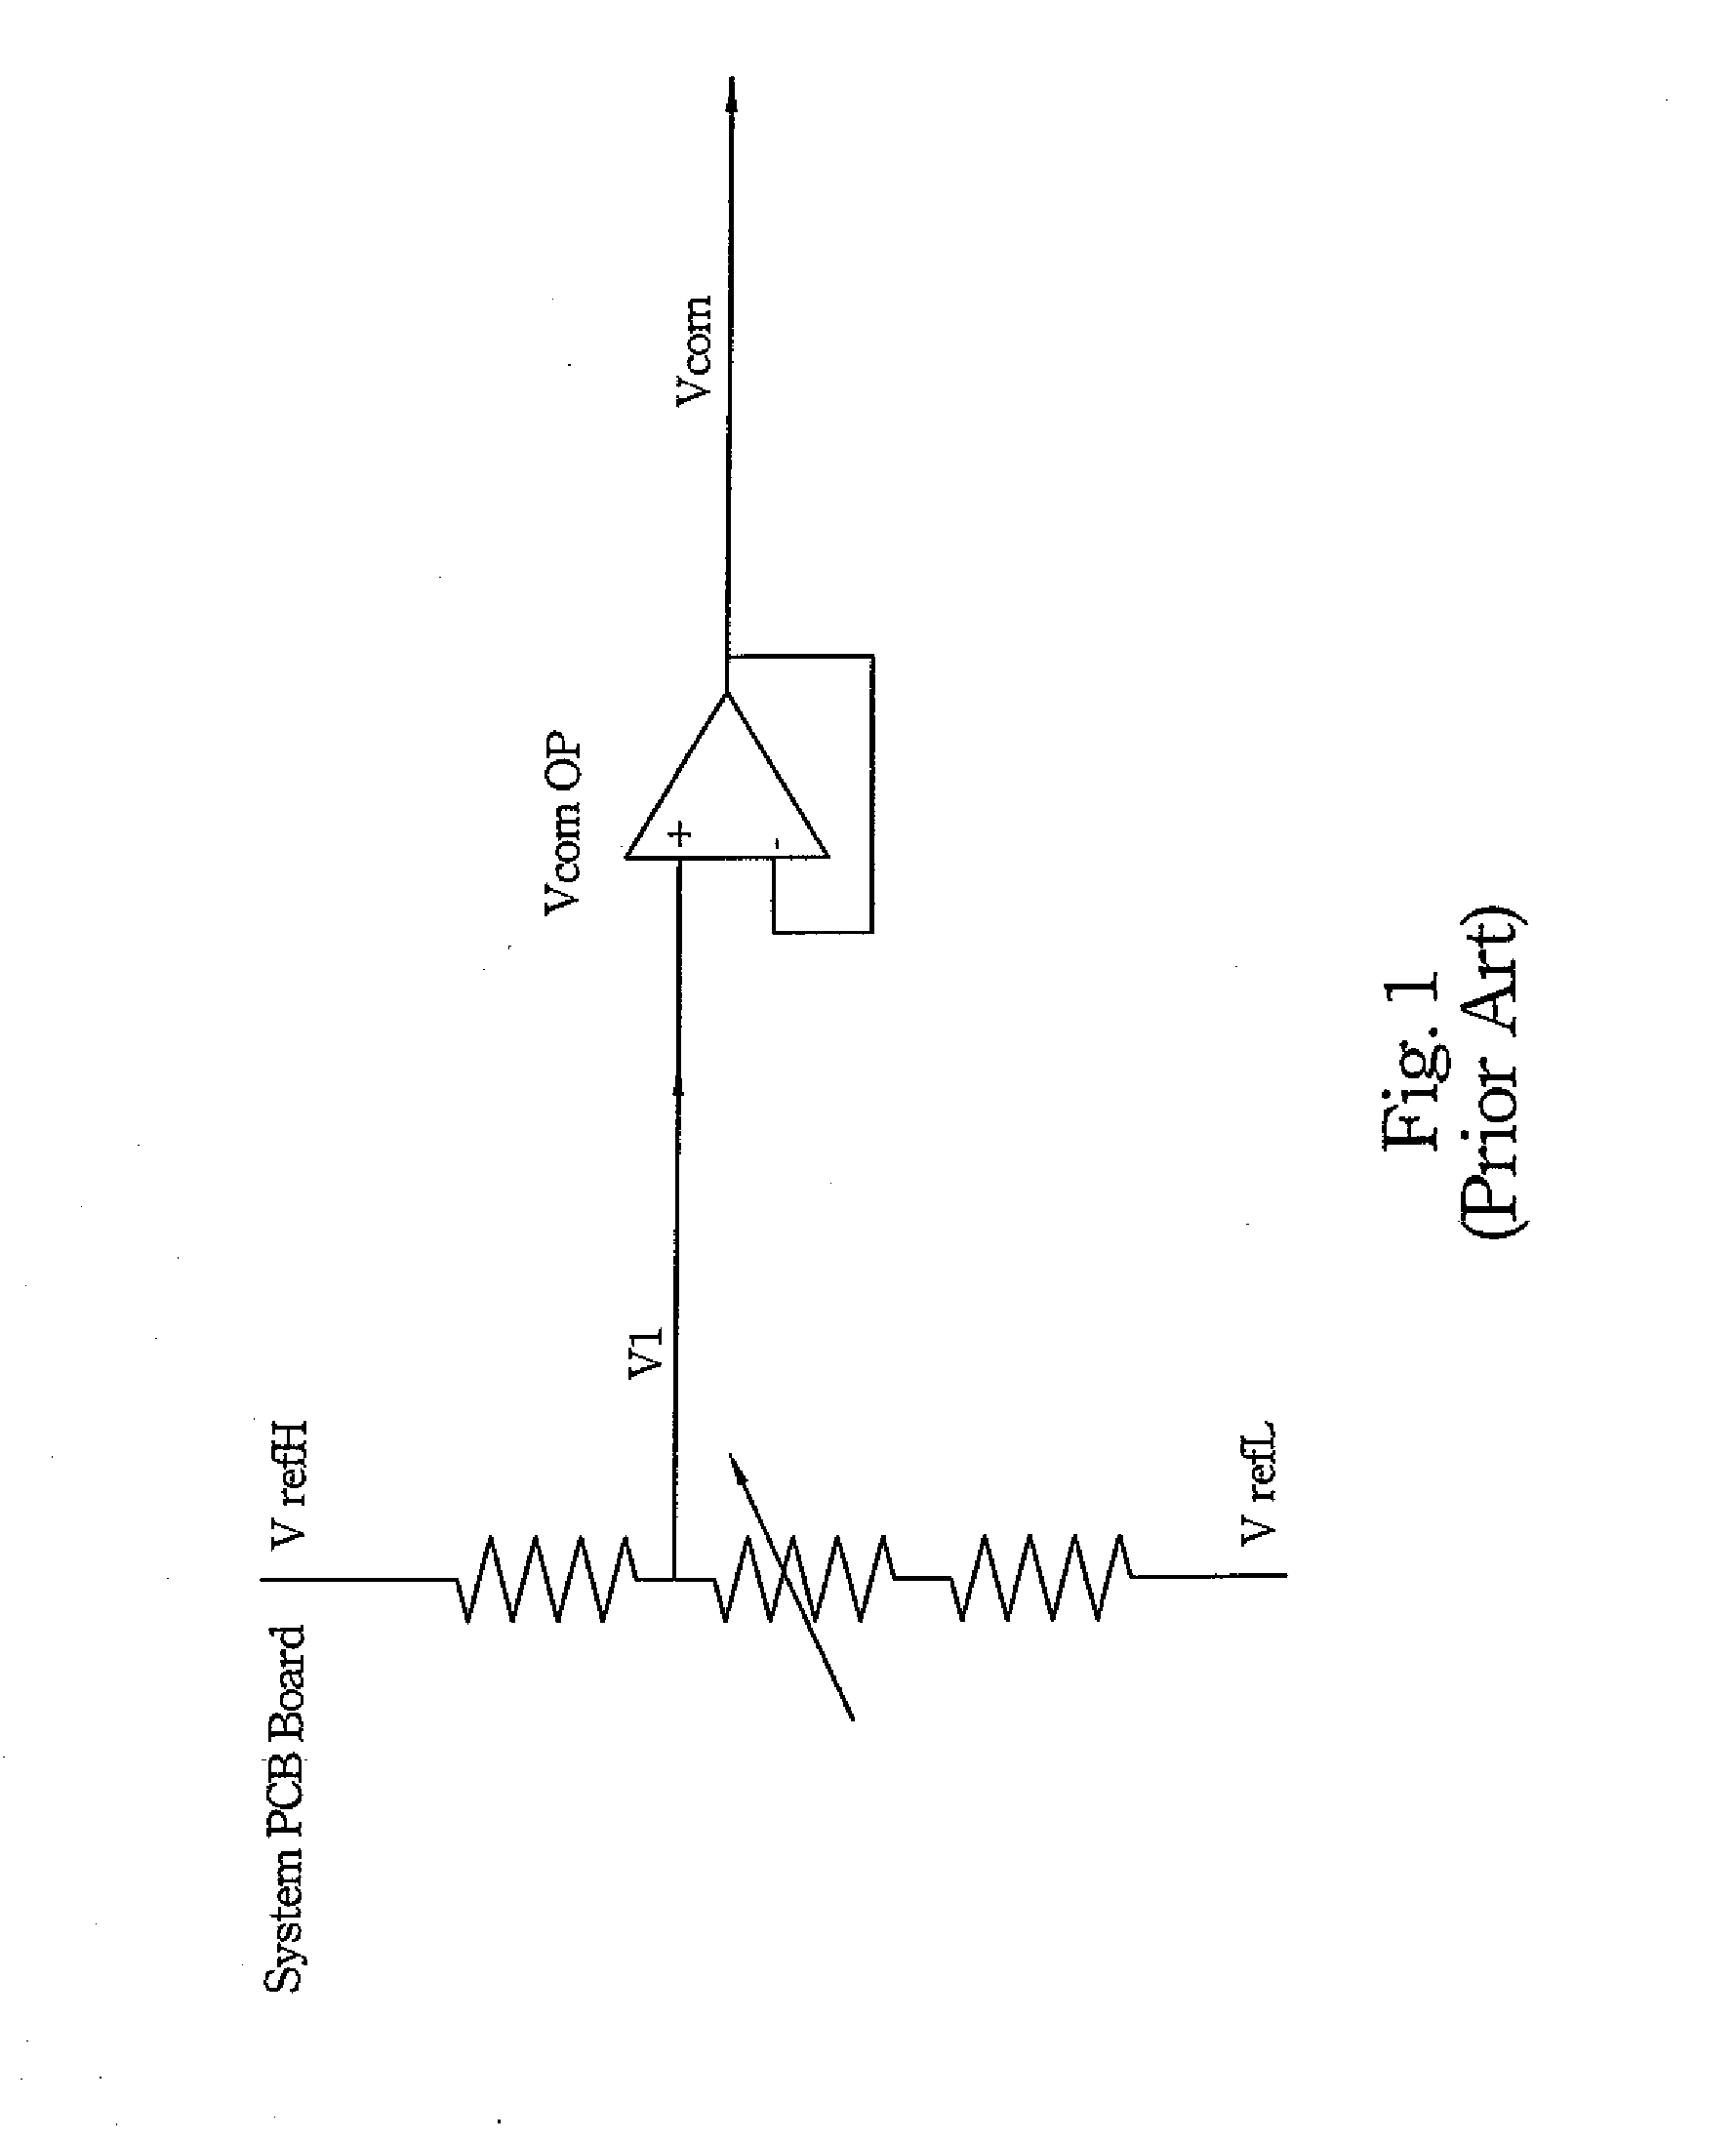 Apparatus for Driving a Display